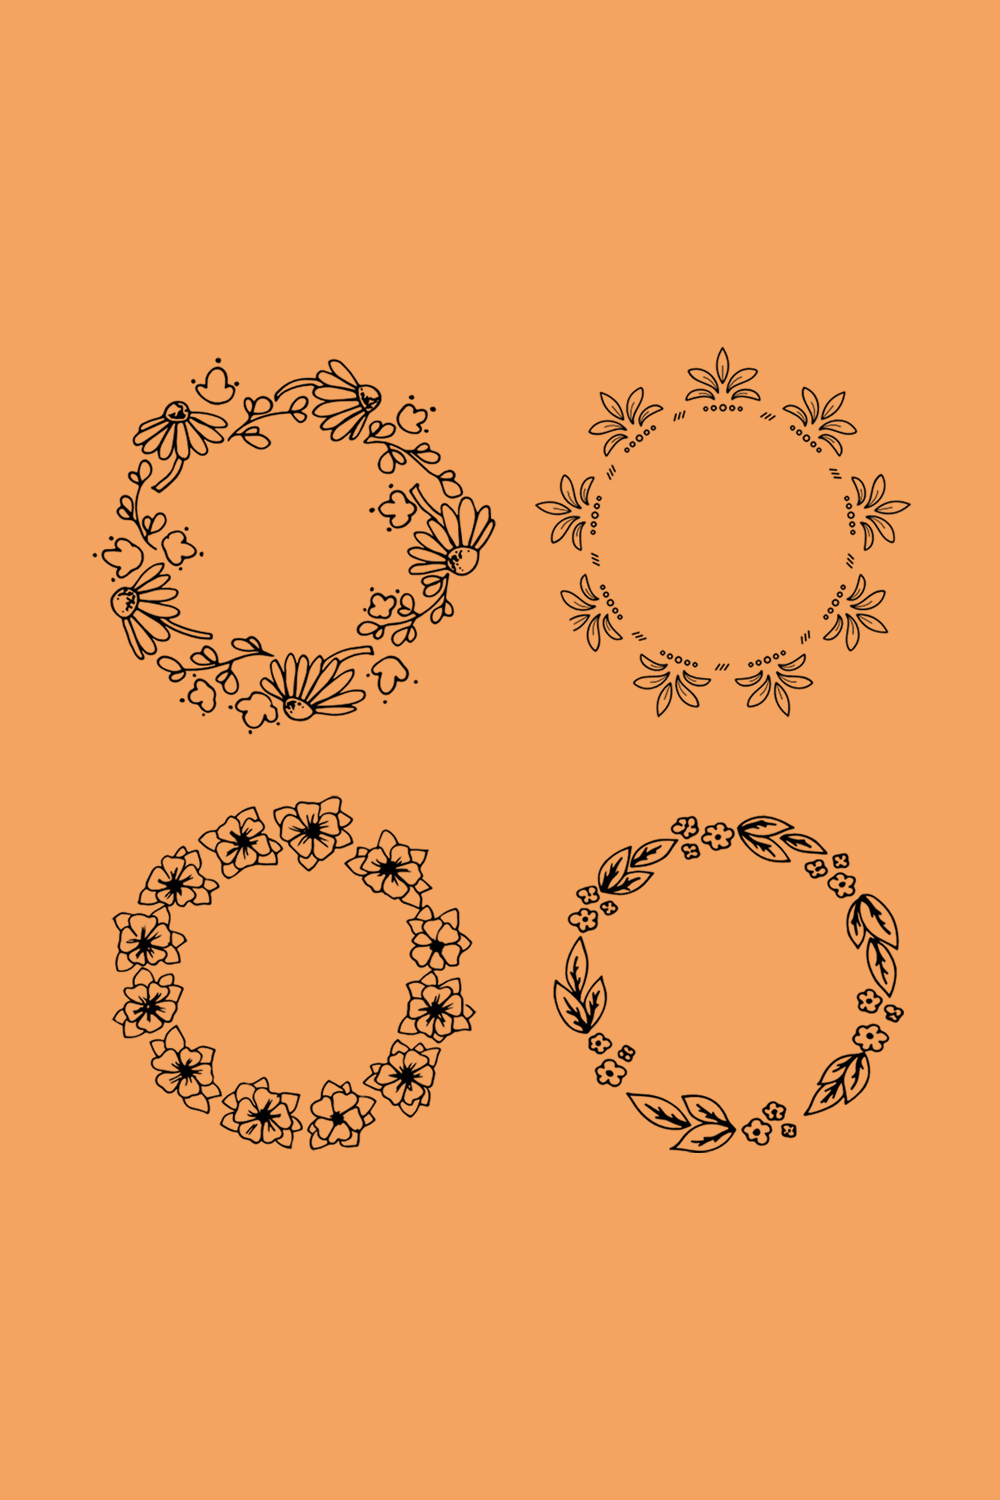 Set of Hand Drawn Round Doodle Floral with Leaves Vector pinterest image.